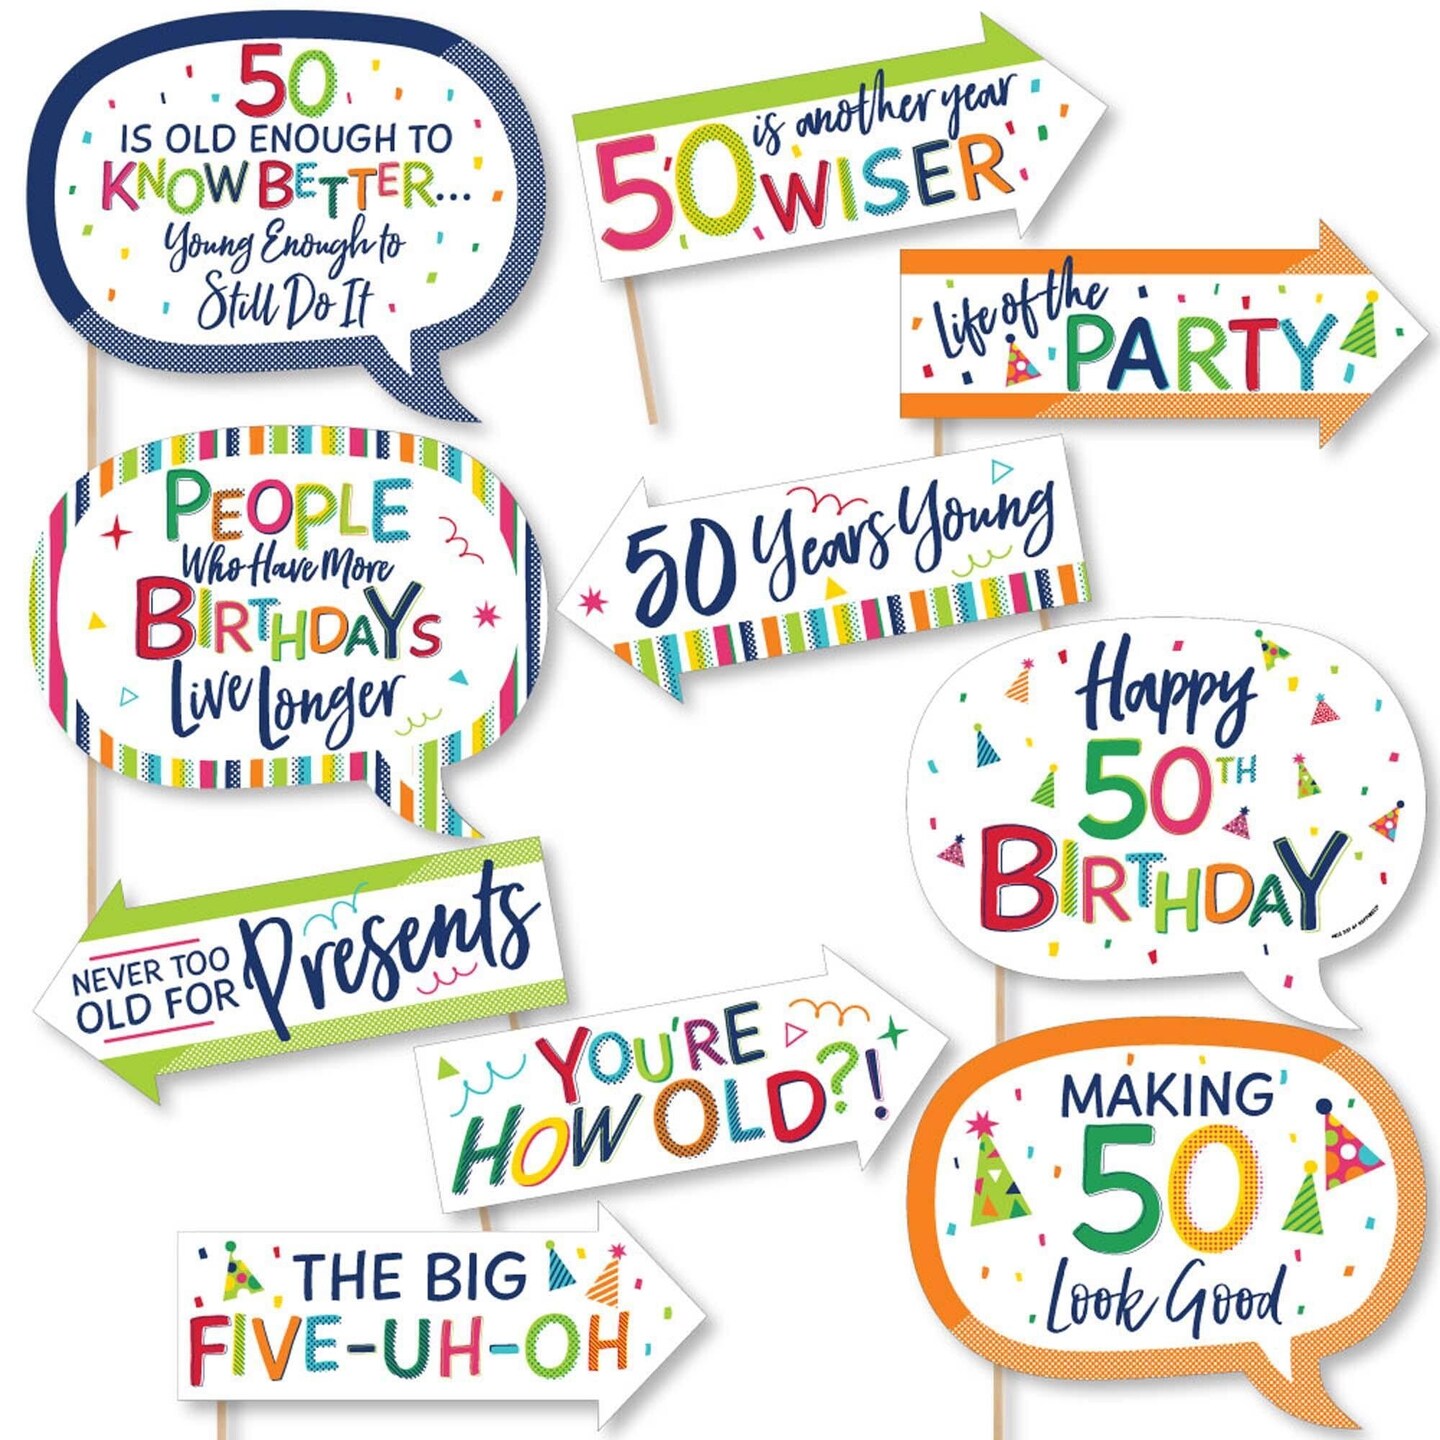 Big Dot of Happiness Funny 50th Birthday - Cheerful Happy Birthday - Colorful Fiftieth Birthday Party Photo Booth Props Kit - 10 Piece